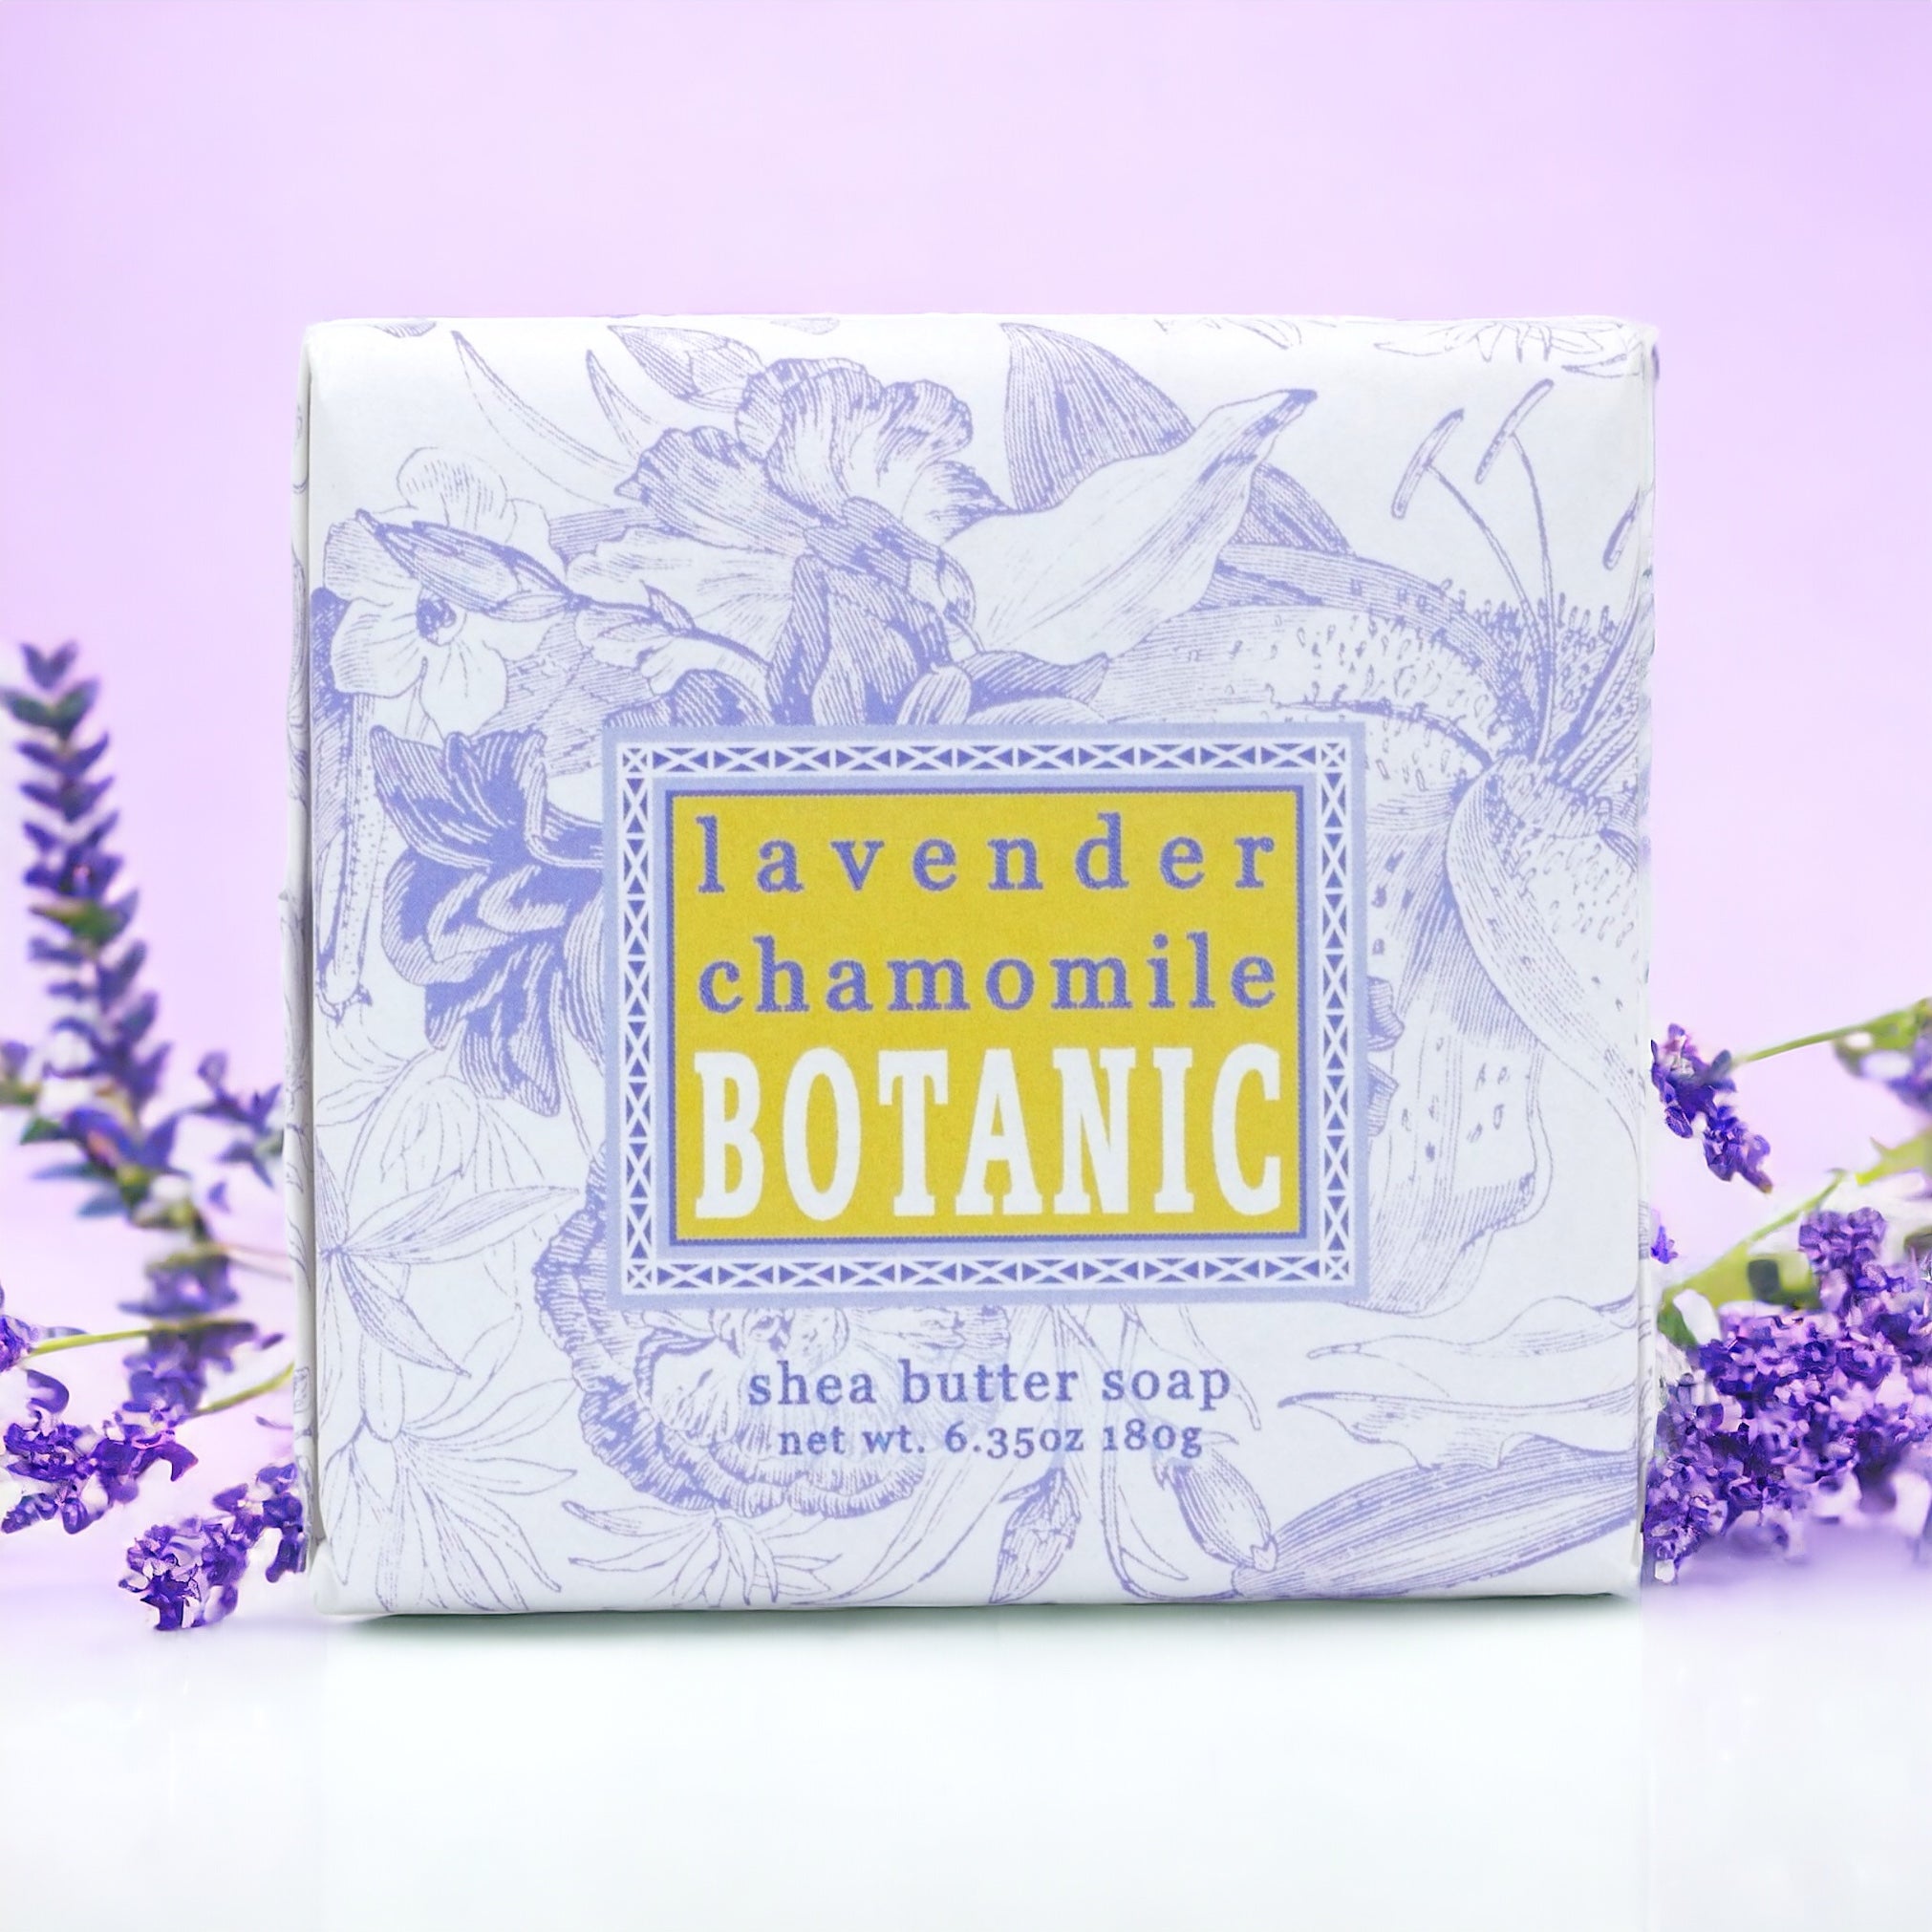 Lavender Chamomile Shea Butter Spa Soap by Greenwich Bay Trading Co.